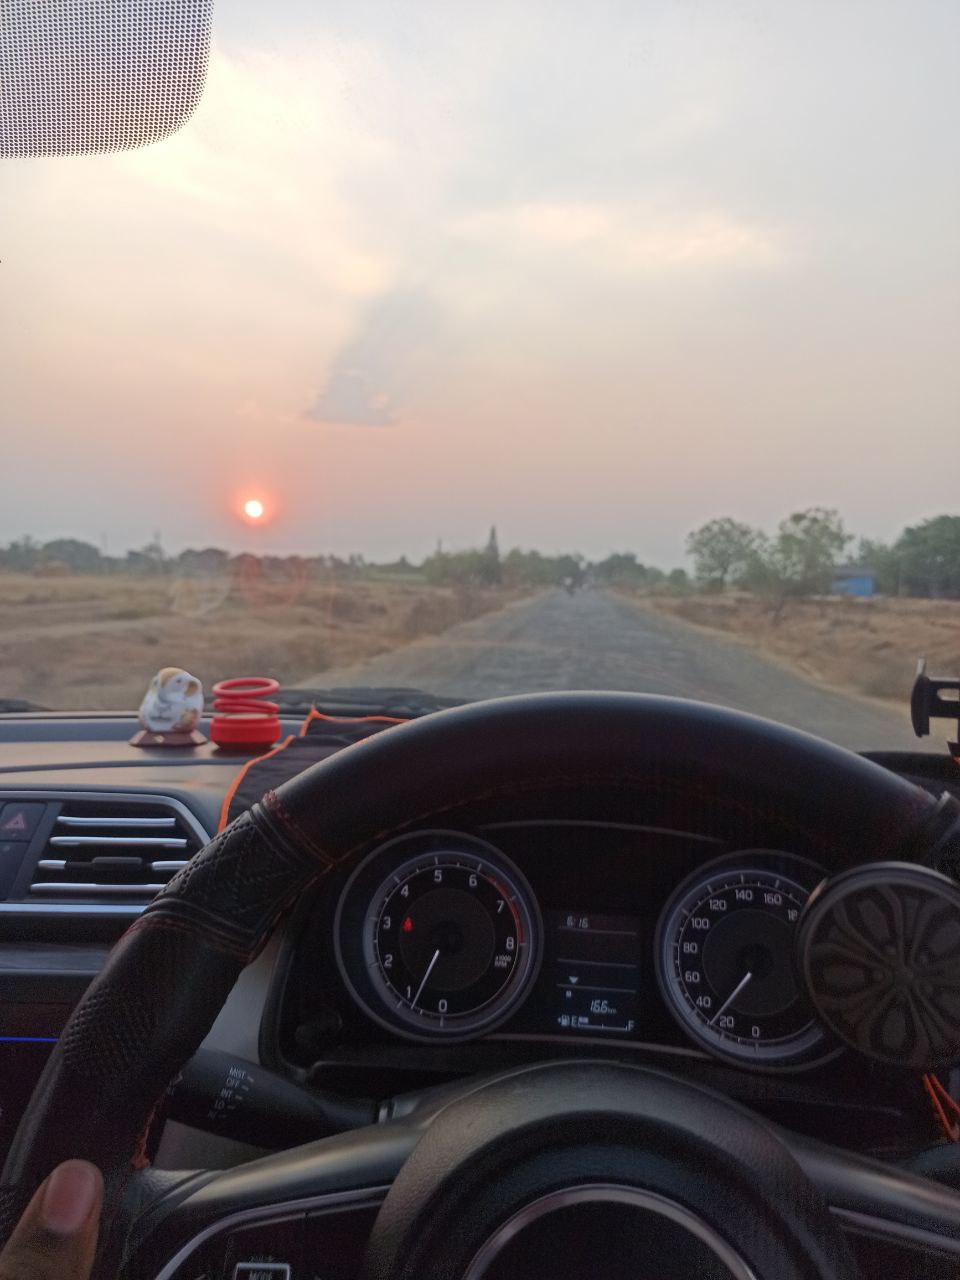 a view of a sunset through the steering wheel of a car